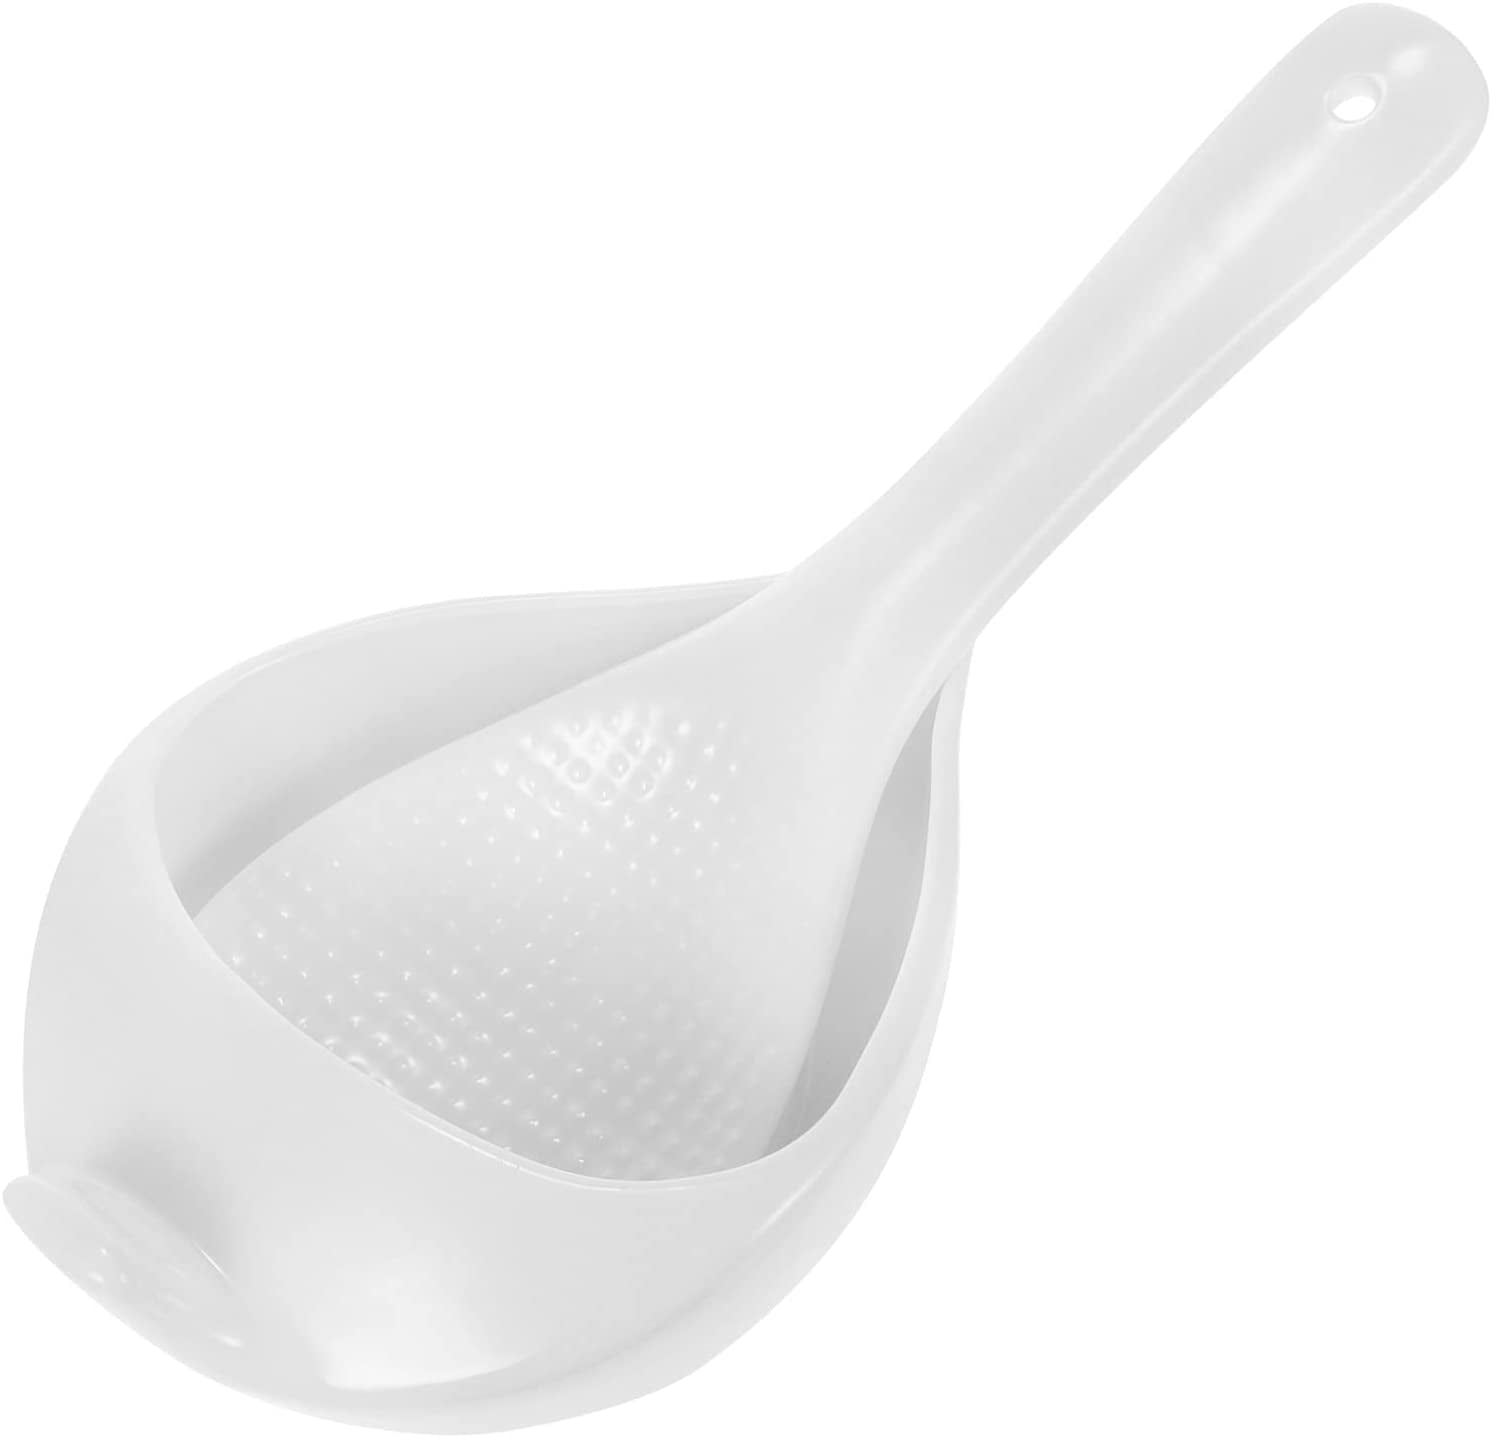 Bundle of 2 Rice Scoop Holder 5 x 4 with Rice Scoop Paddle Spoon White 